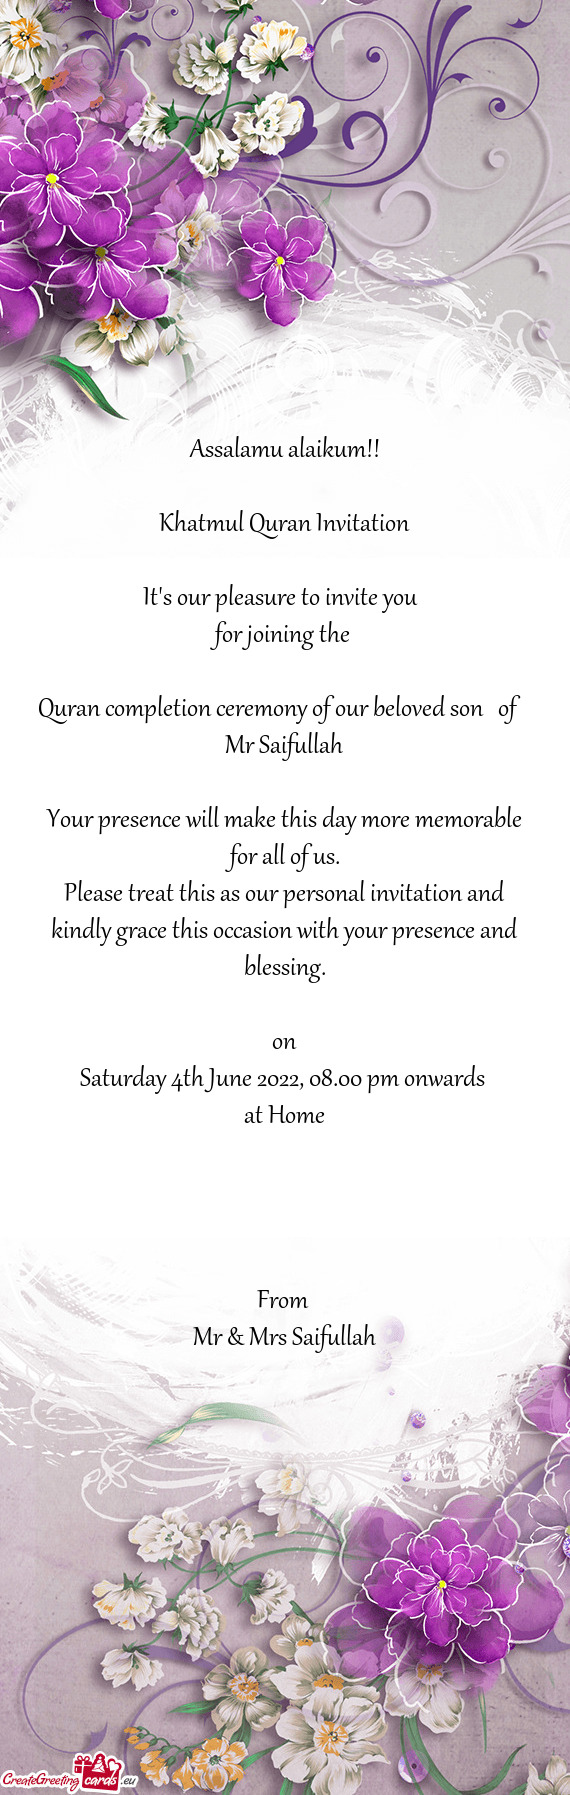 Quran completion ceremony of our beloved son of